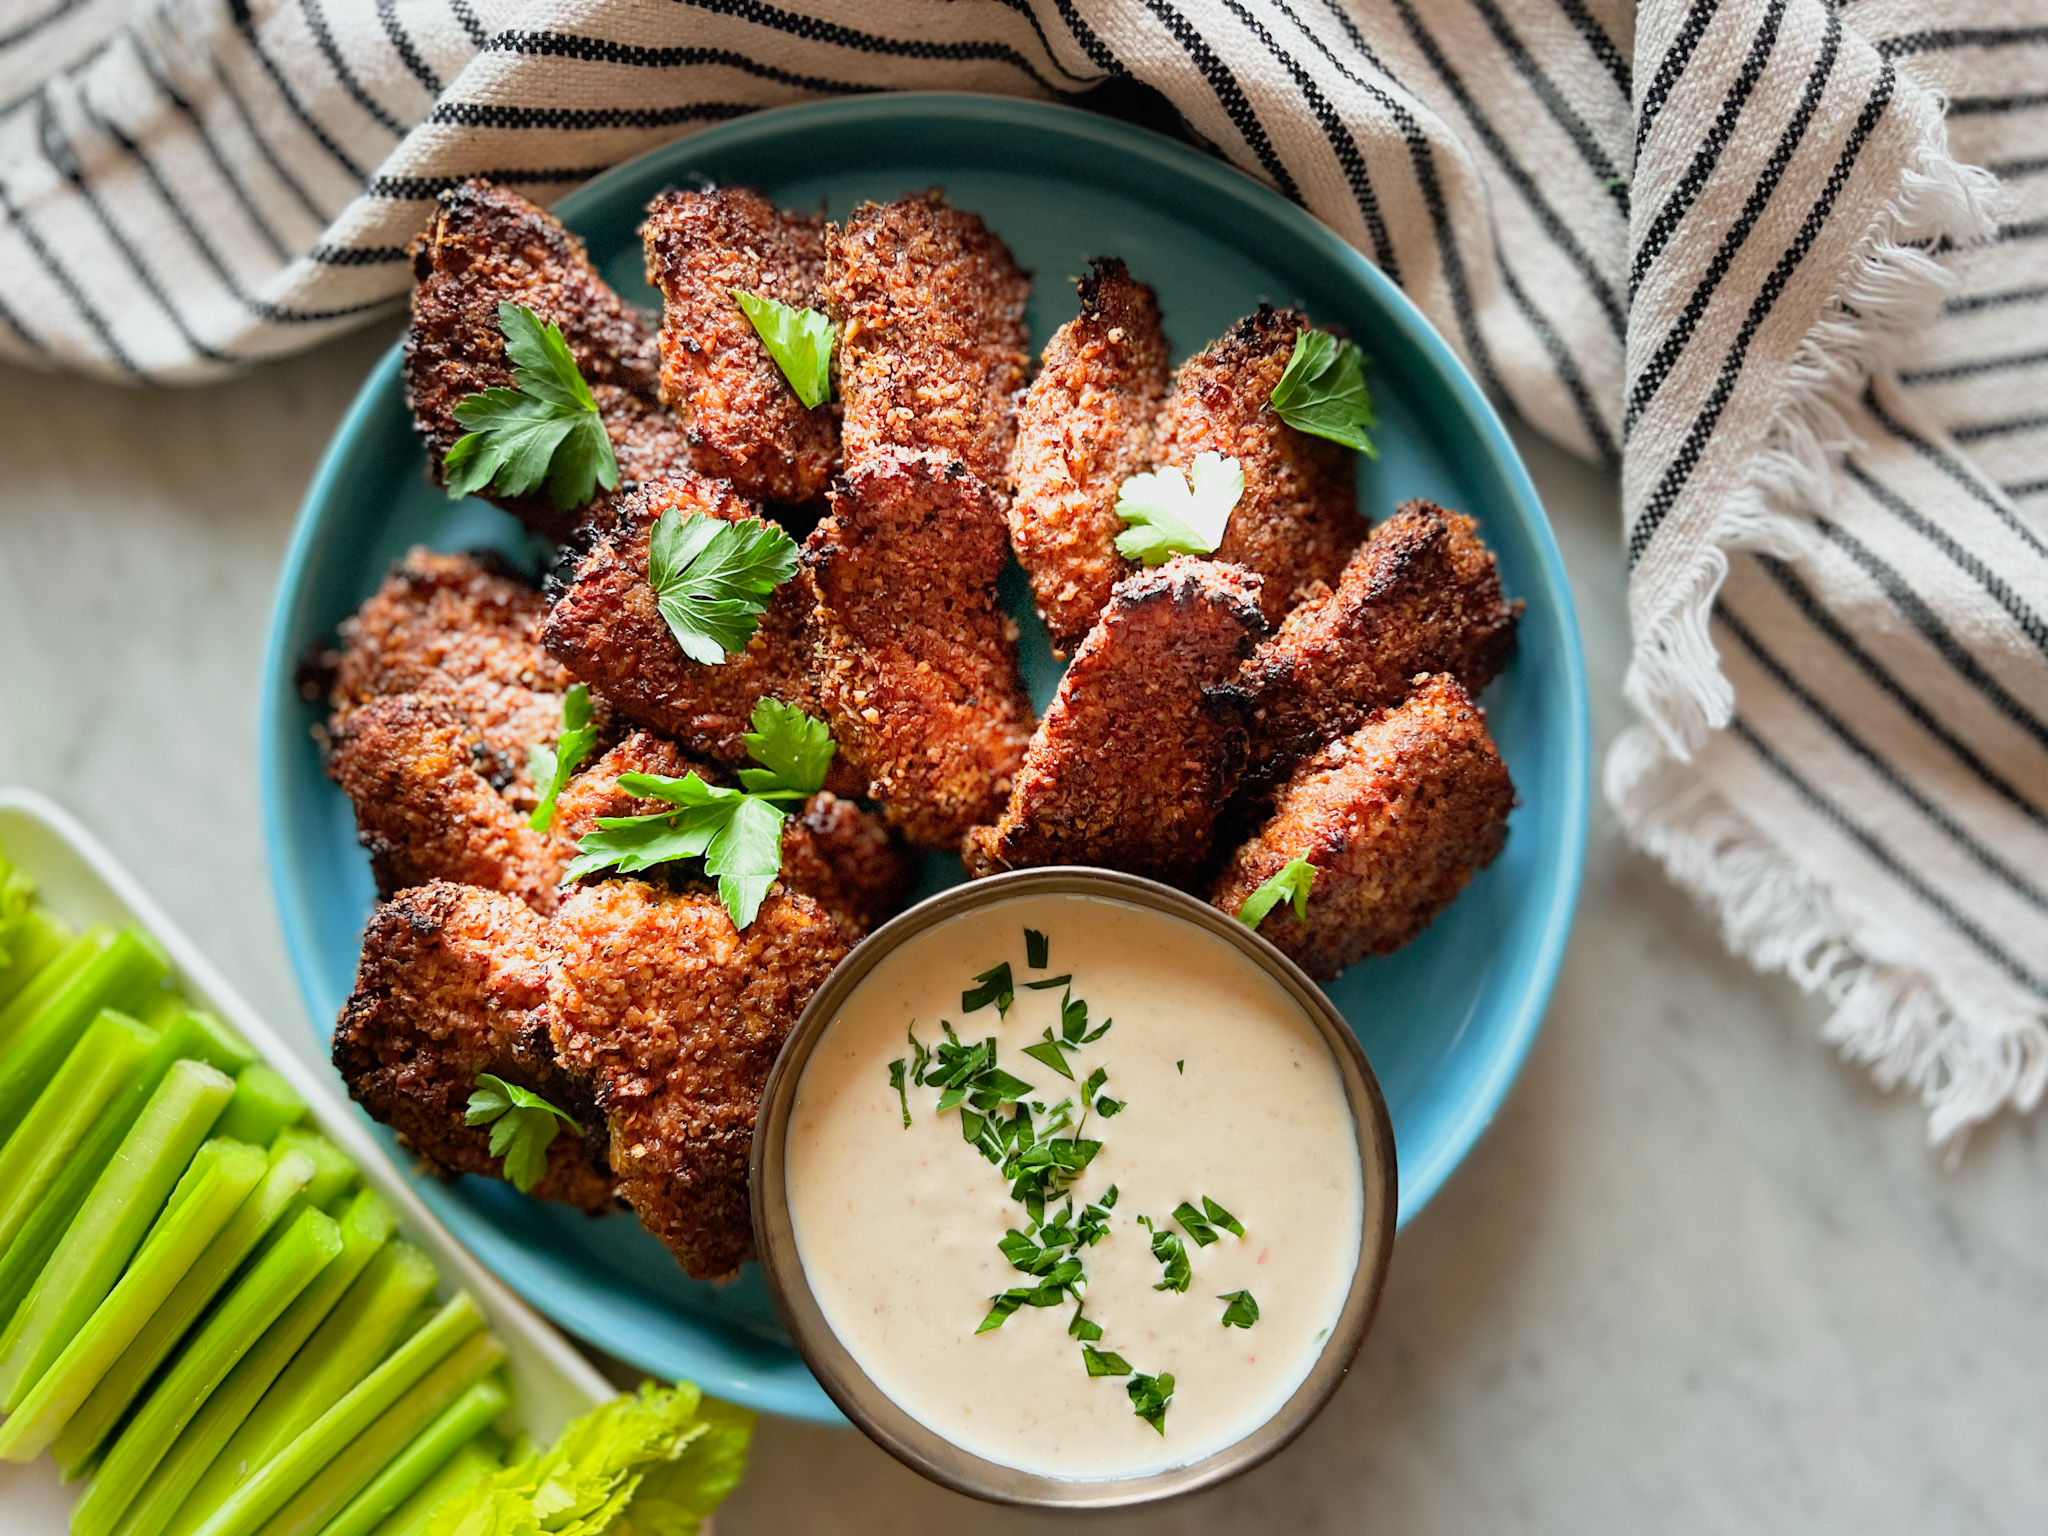 Gluten free pecan crusted chicken tenders on a blue plate with a peach dipping sauce, celery and a striped napkin